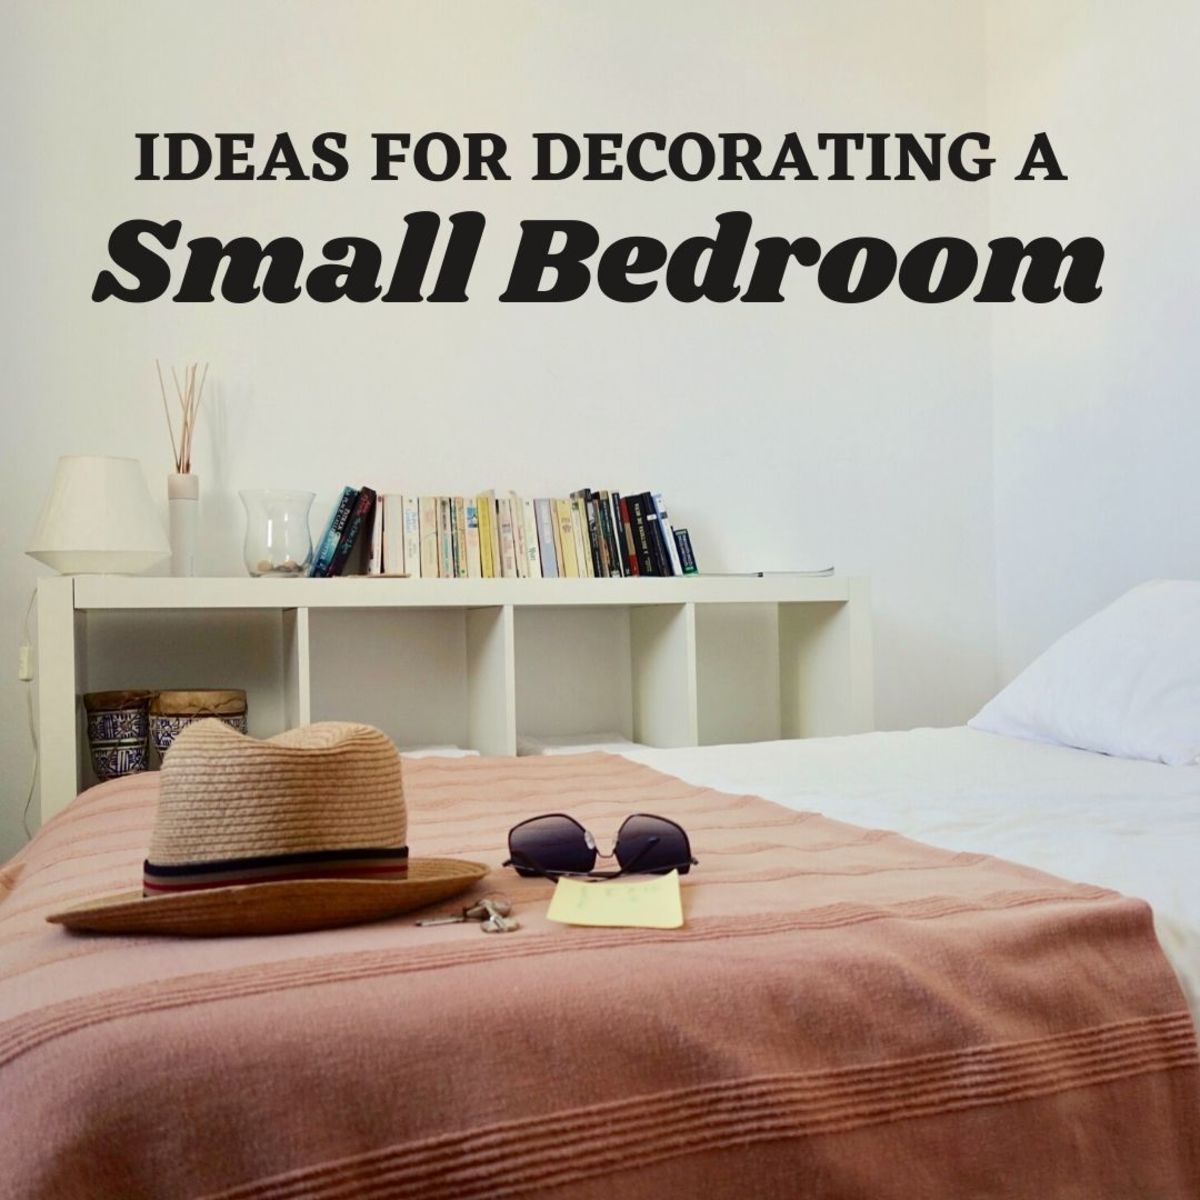 Small Bedroom Design Ideas: Decoration Tips for a Tiny Space